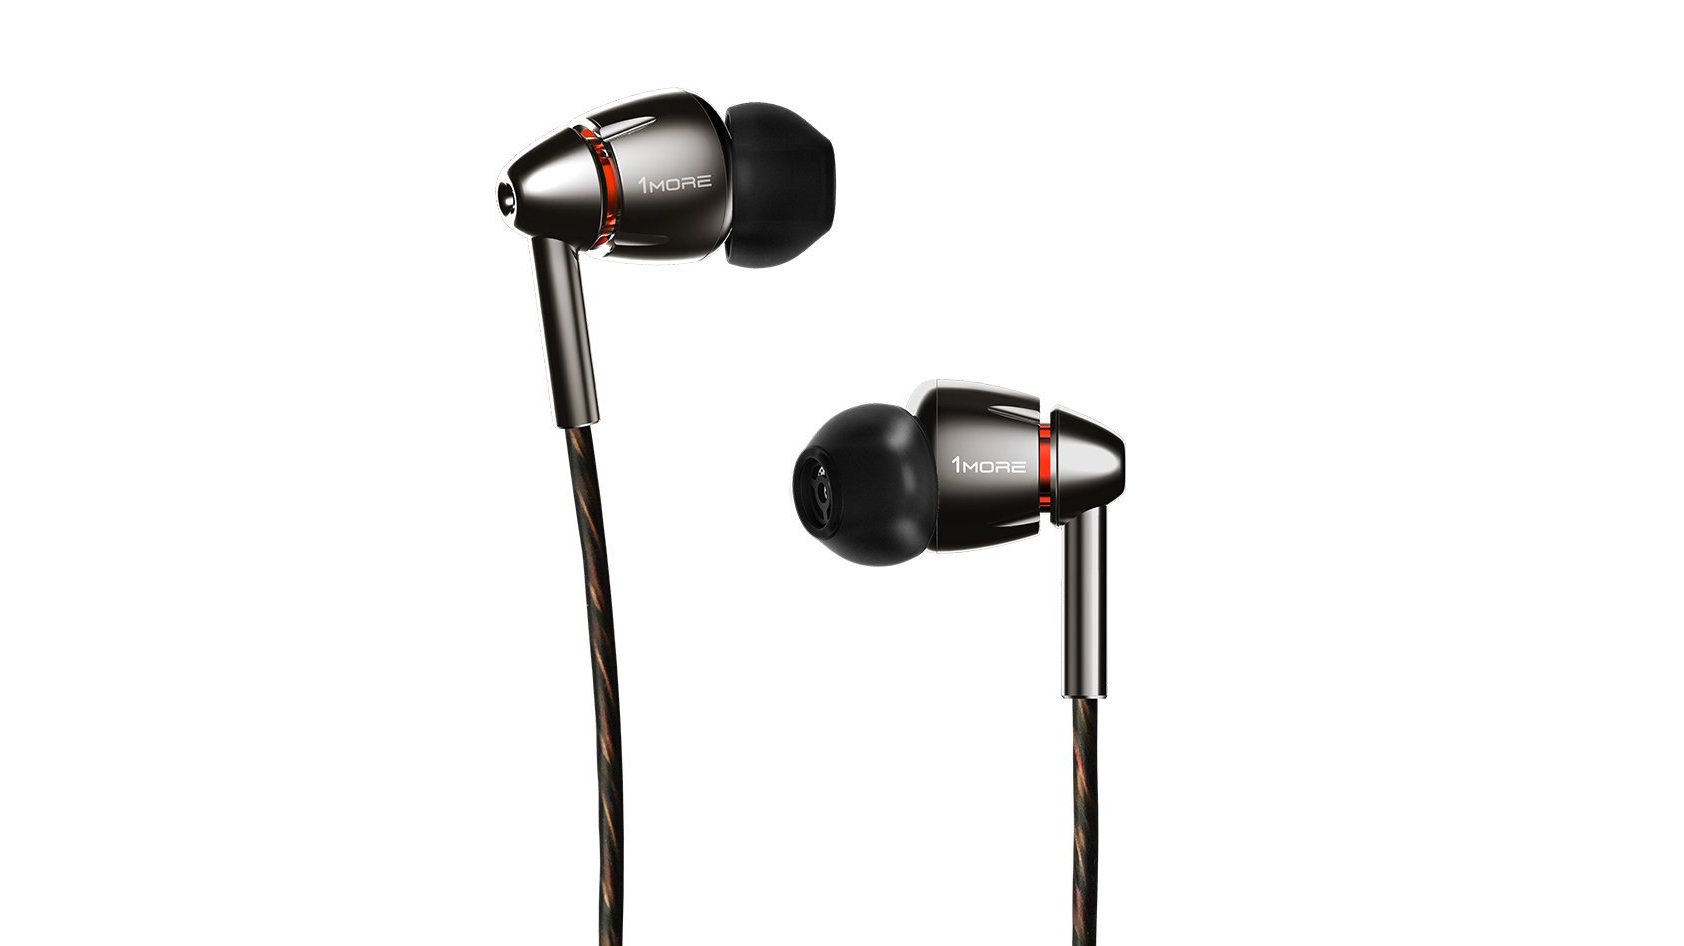 The 1MORE Quad Driver In-Ear Earphones against a white background.